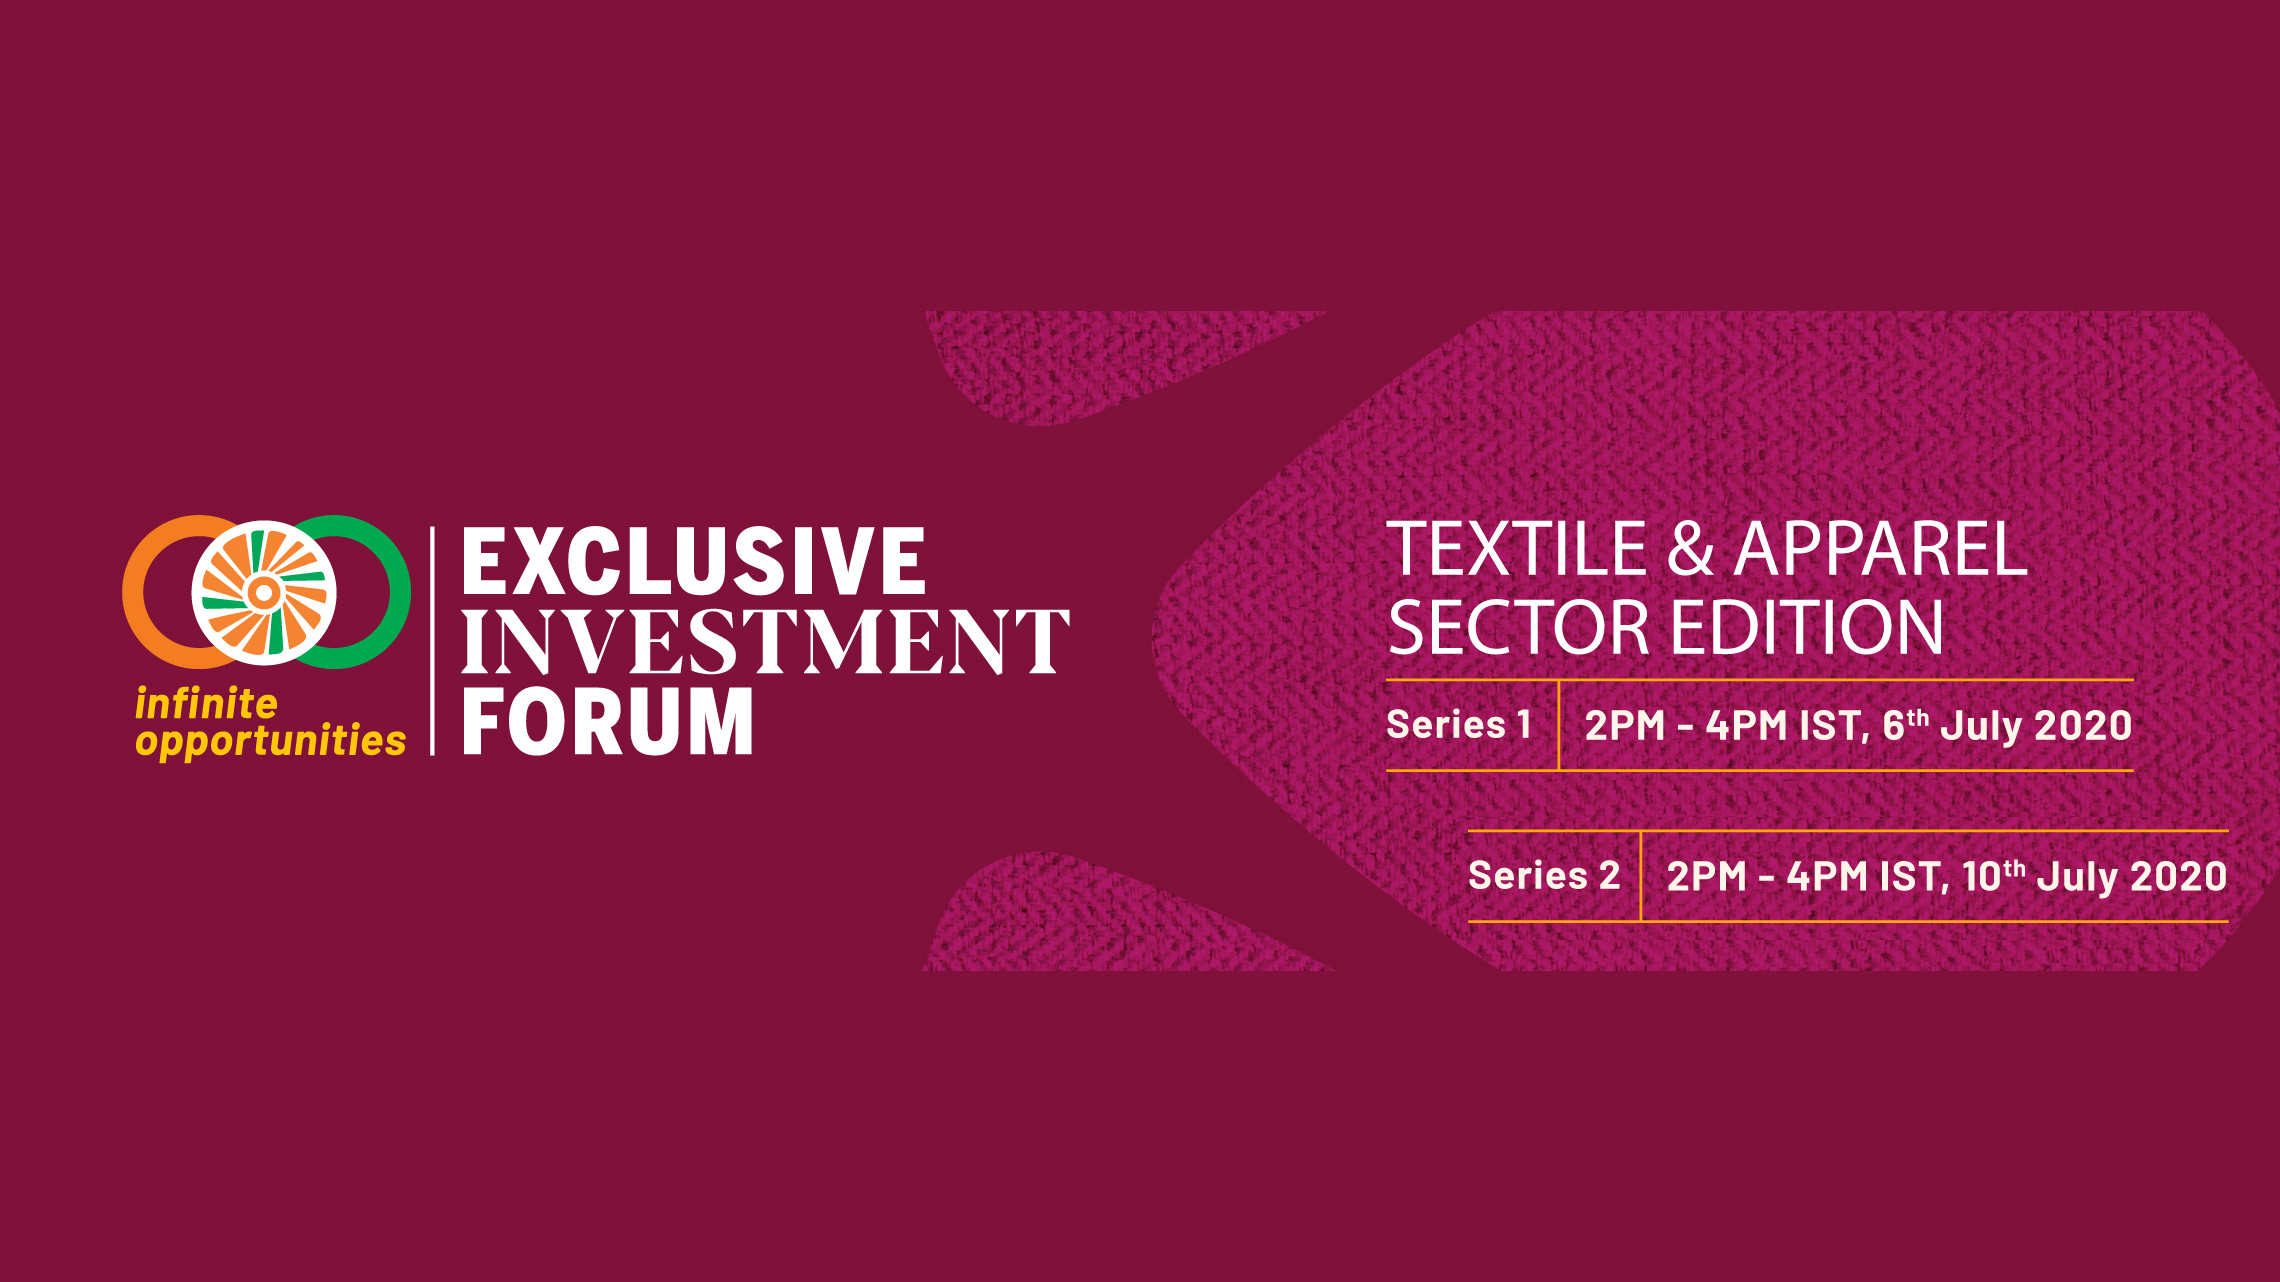 nvest India Exclusive Investment Forum: Textiles and Apparel Edition Banner